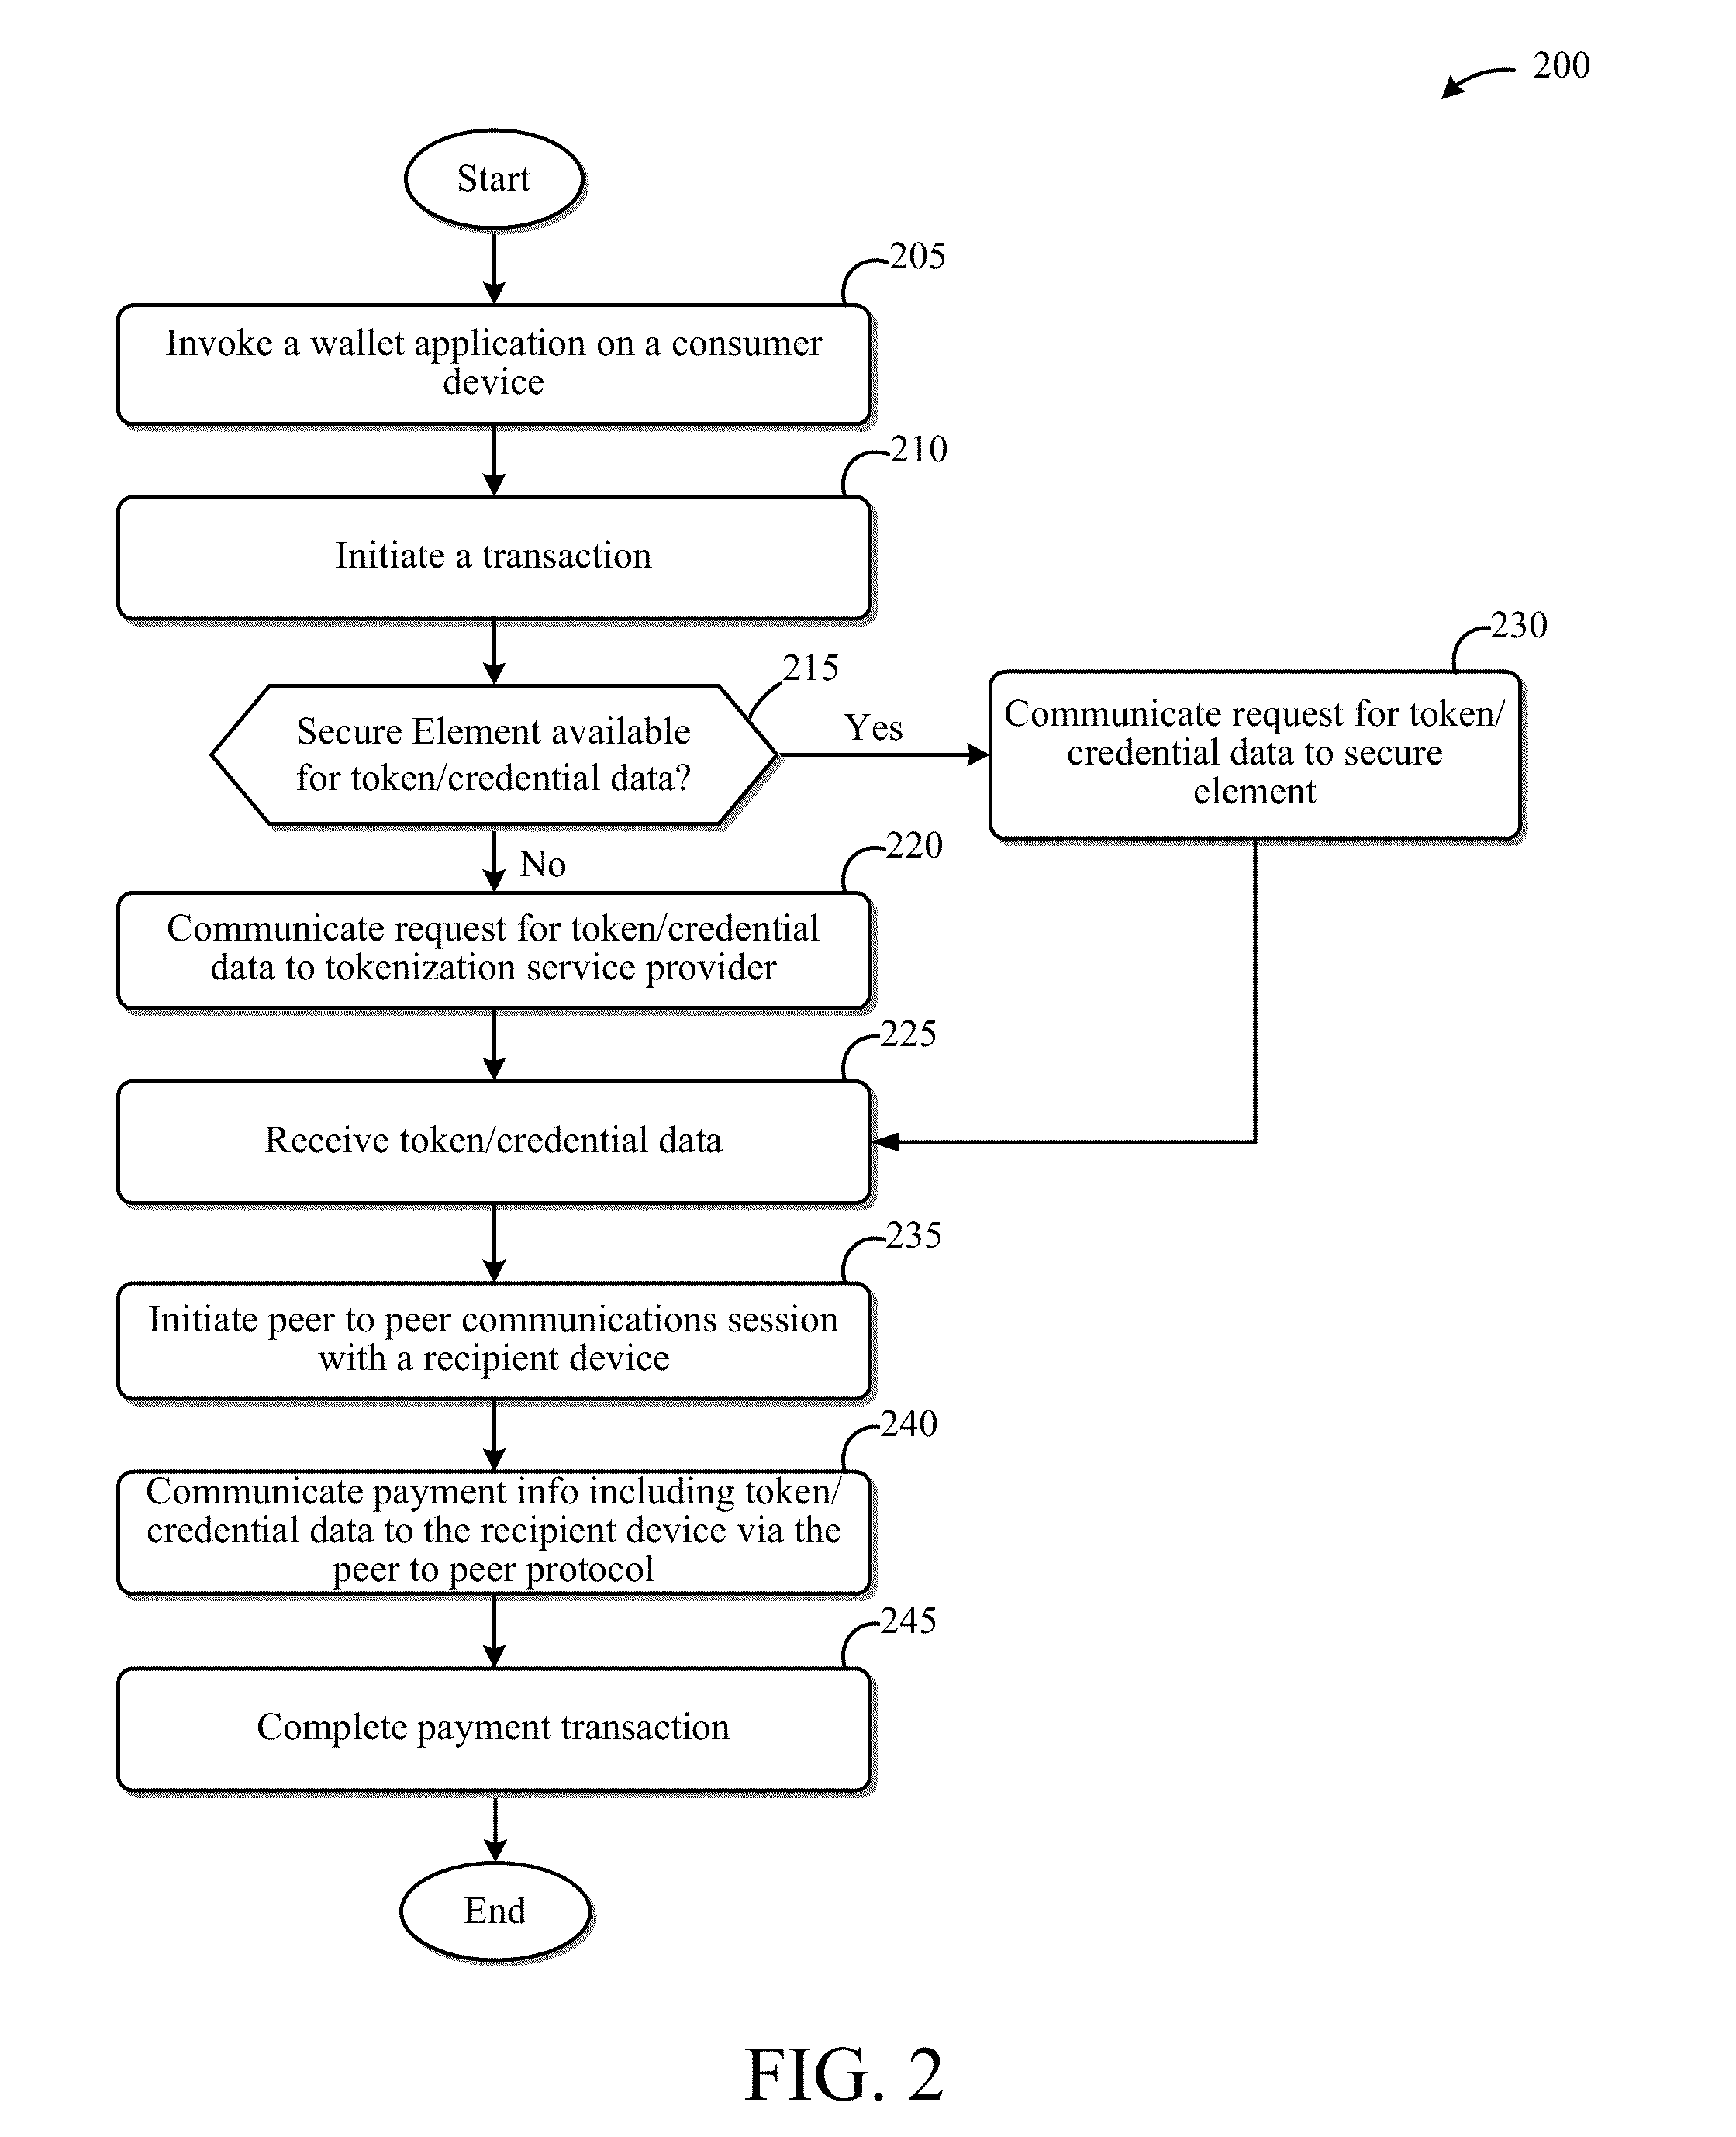 Systems and Methods for Facilitating Payments Via a Peer-to-Peer Protocol